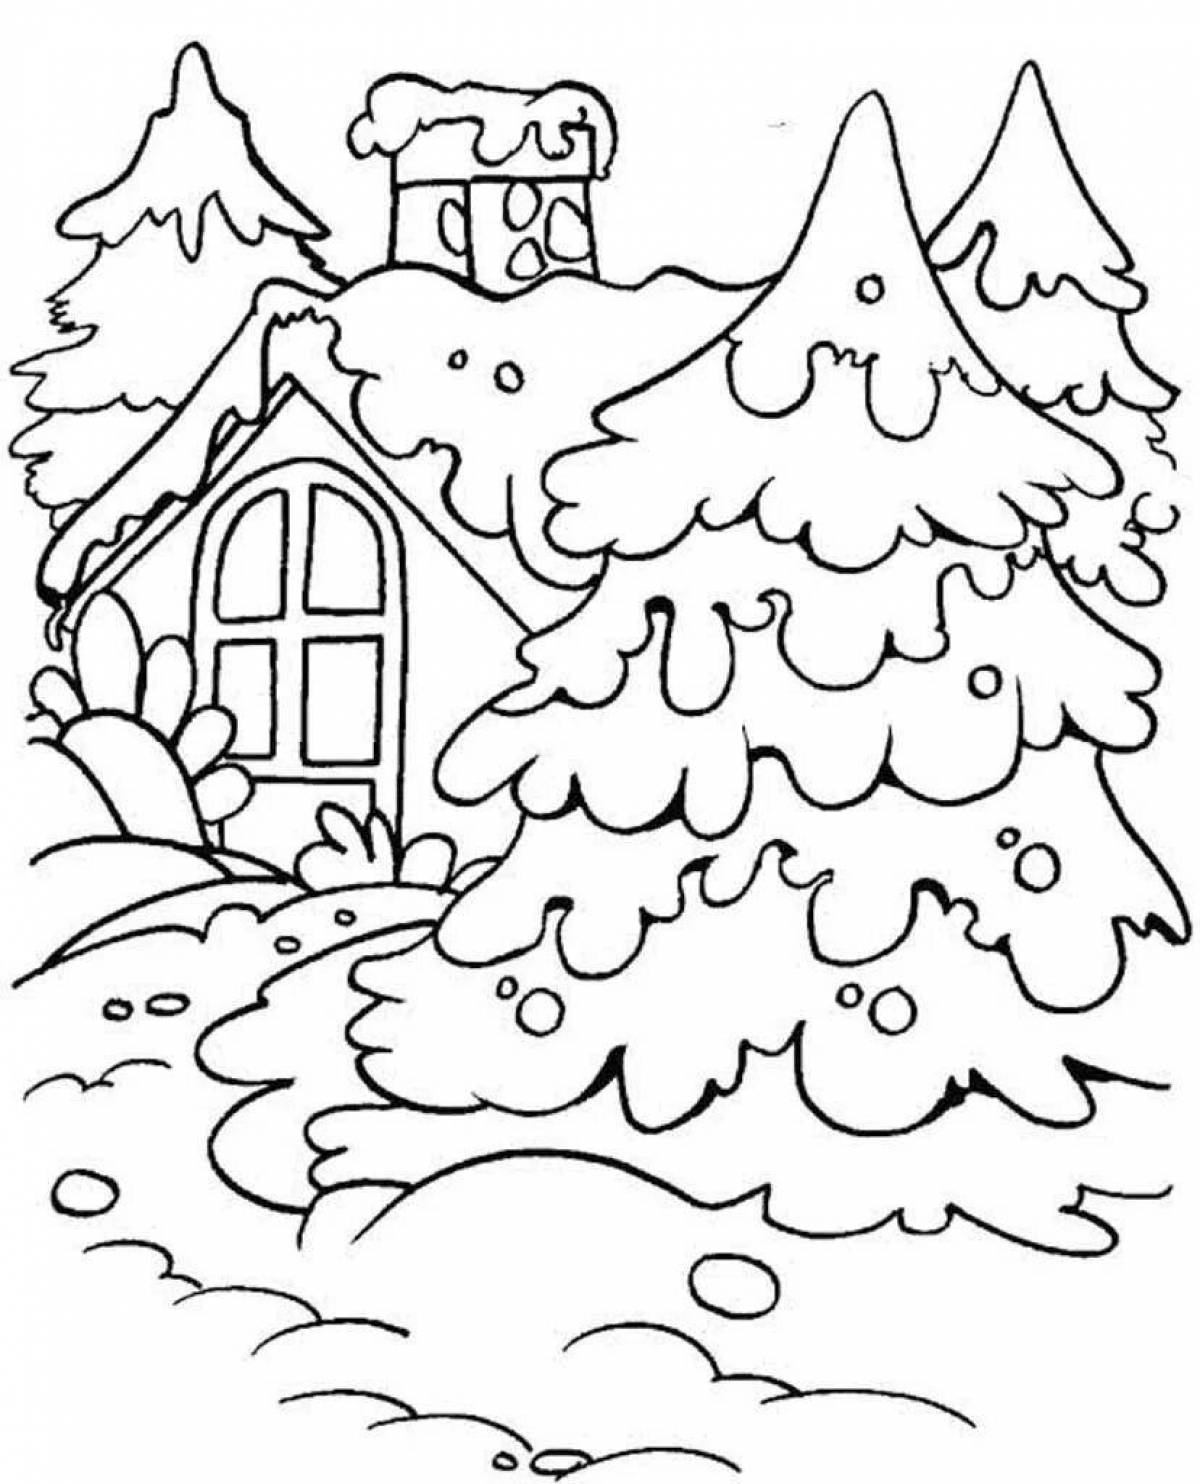 Coloring book soothing tree in the snow